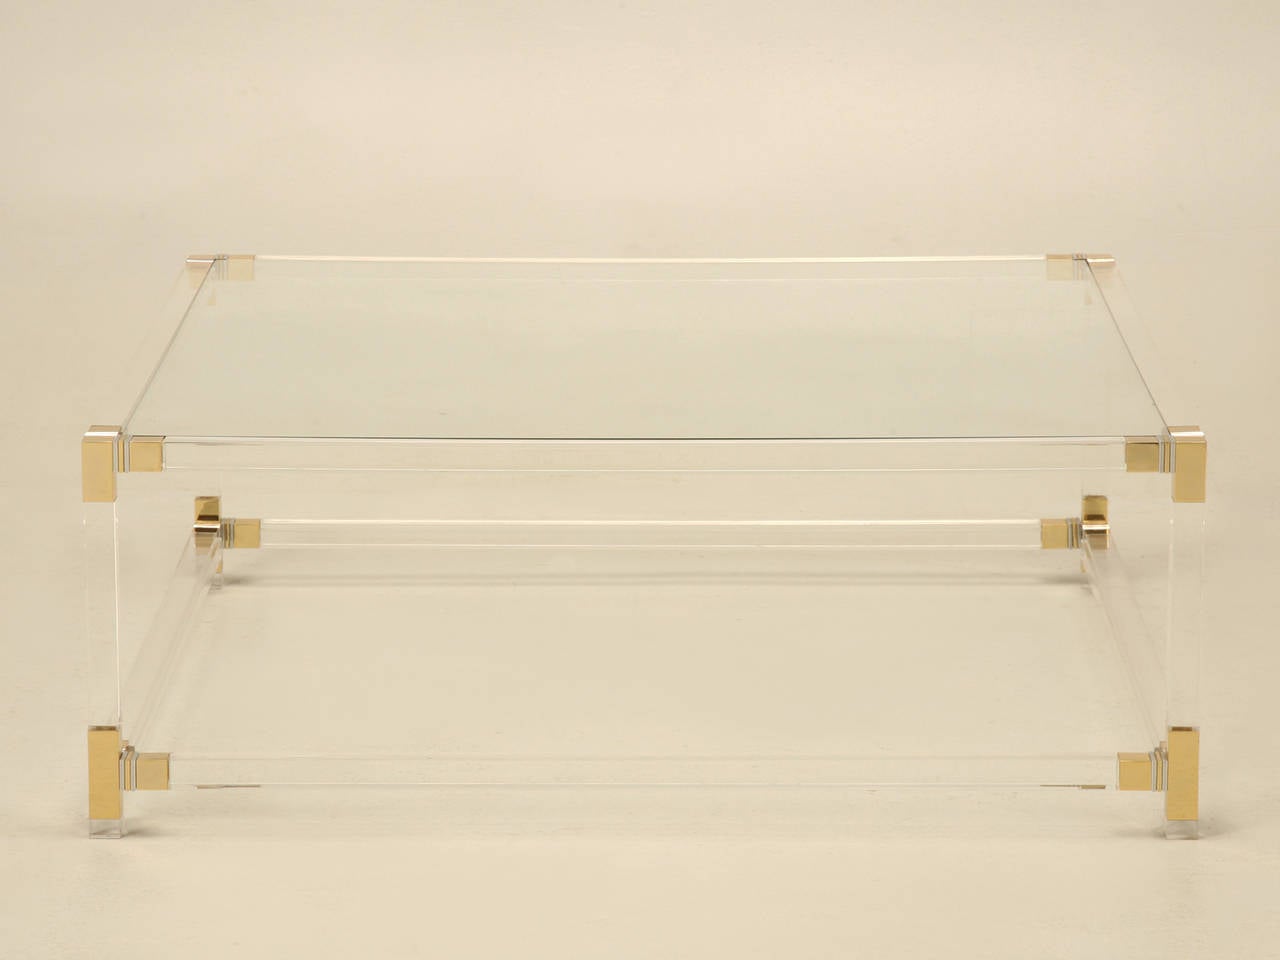 This may be one of the first large “square” acrylic coffee tables we have ever found, for the last several years every one we locate seems to be your typical rectangle. Very nice all original condition with no previous repairs.